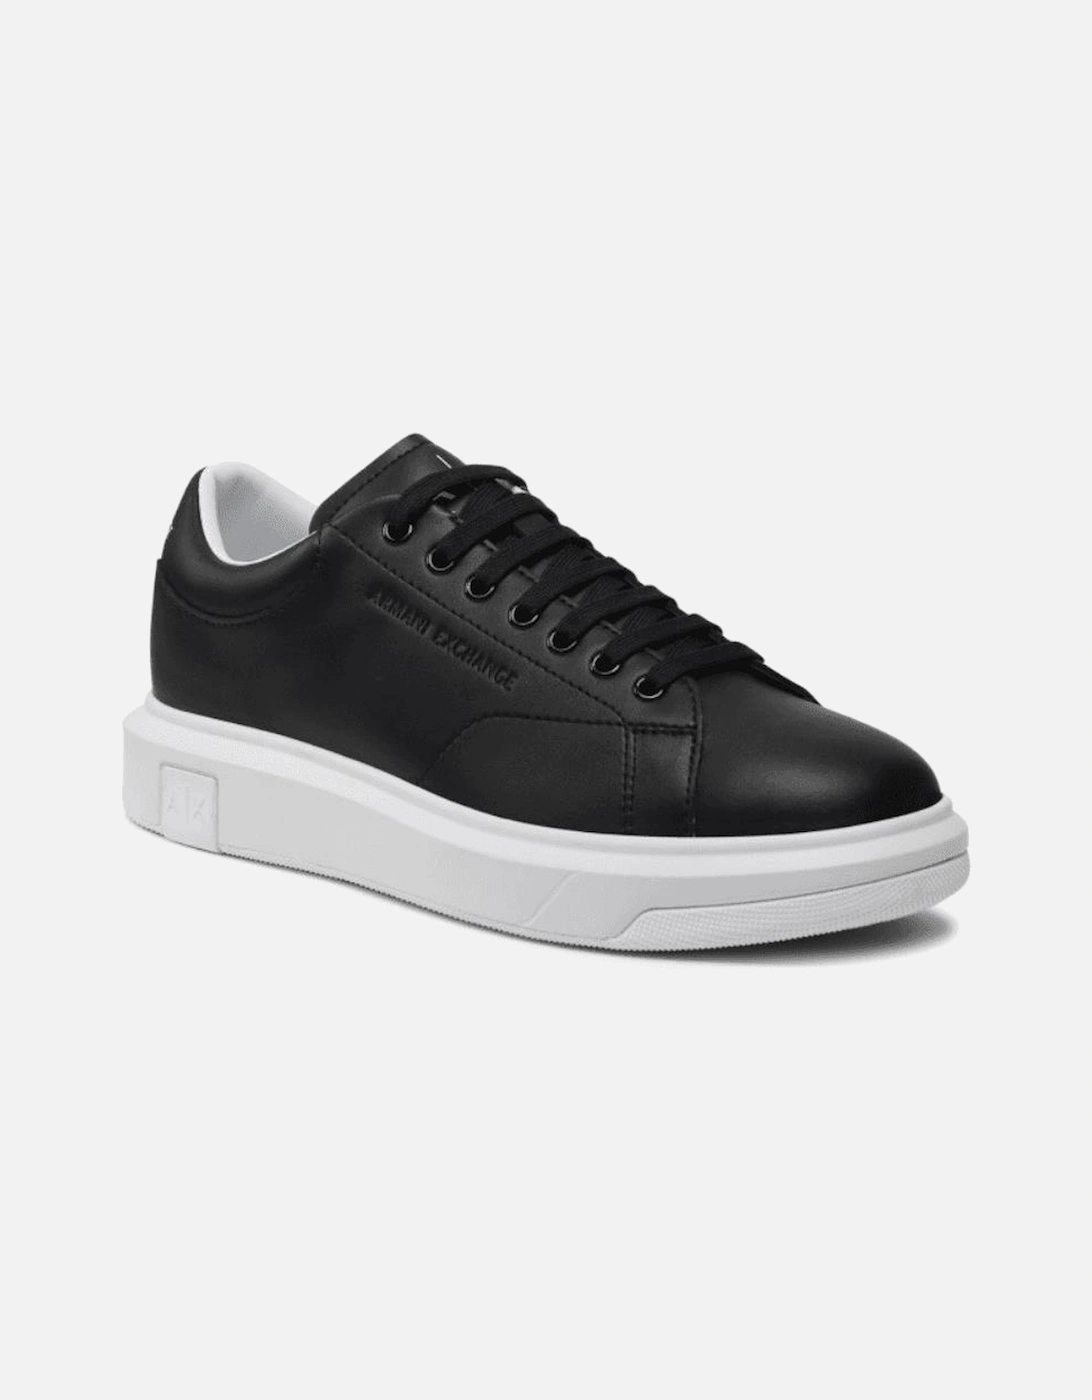 Action Leather Black/White Sneaker Trainer